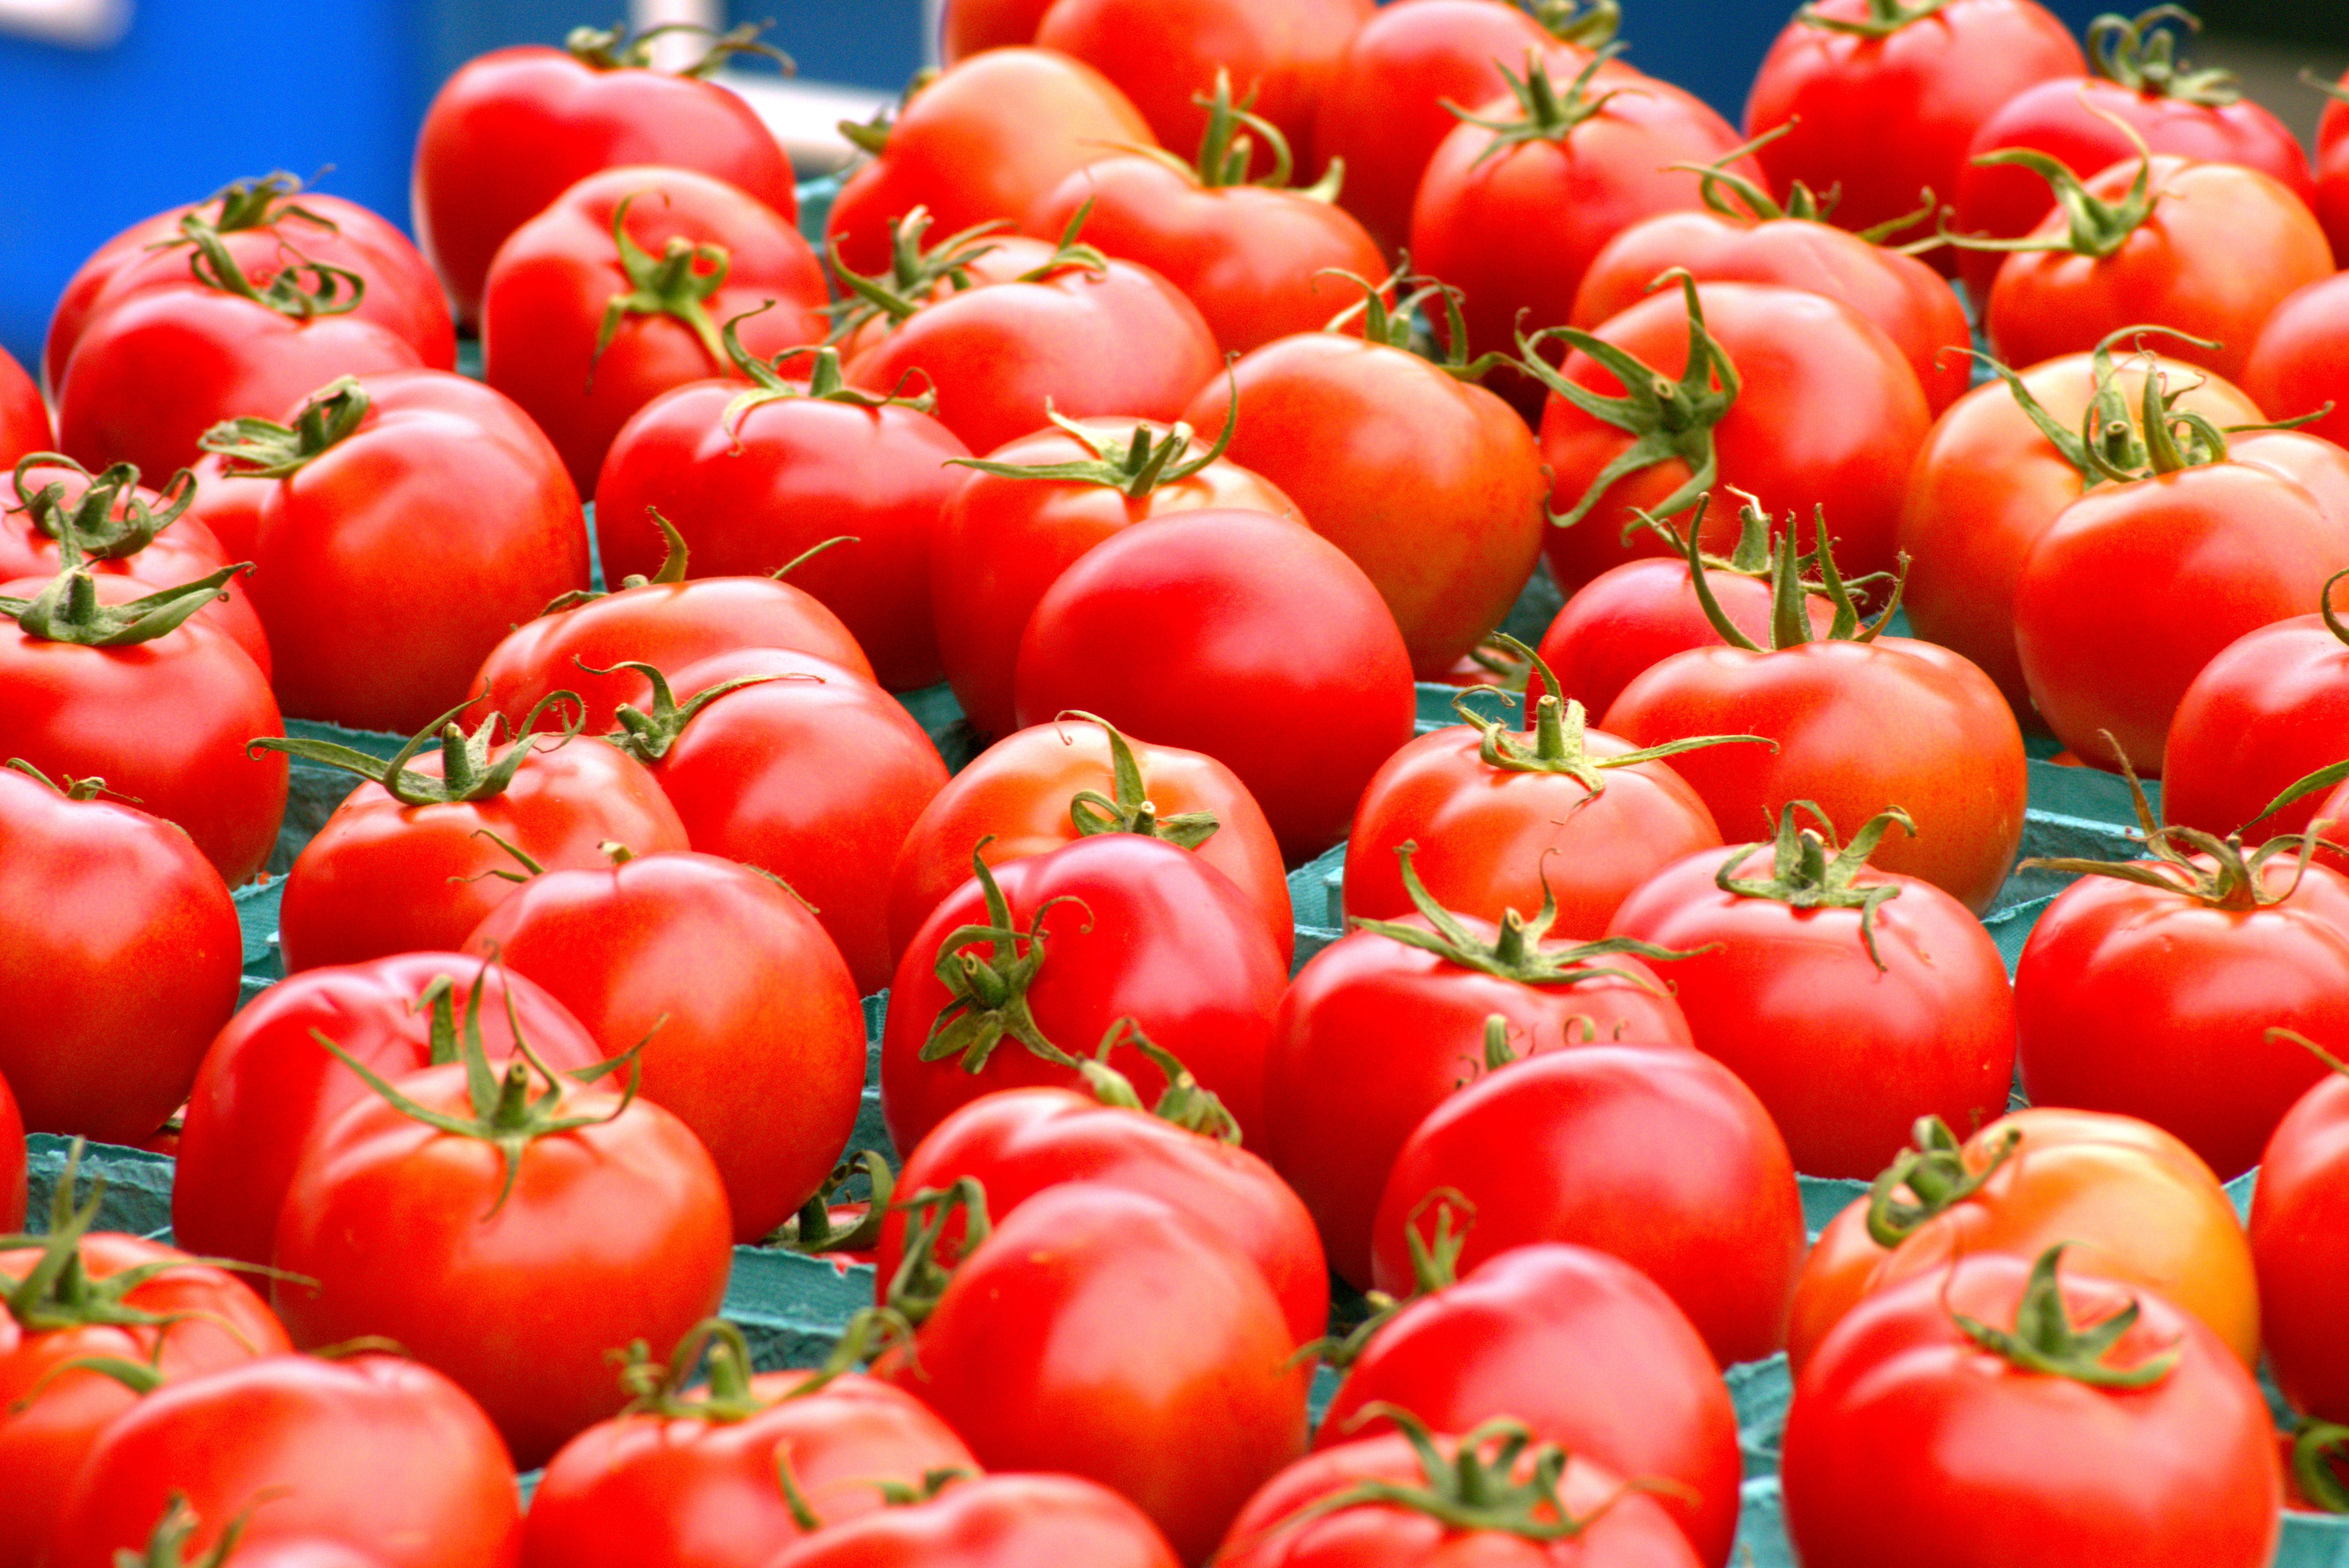 Featured image for “N.C. State Tomato Field Day Slated for Aug. 11”